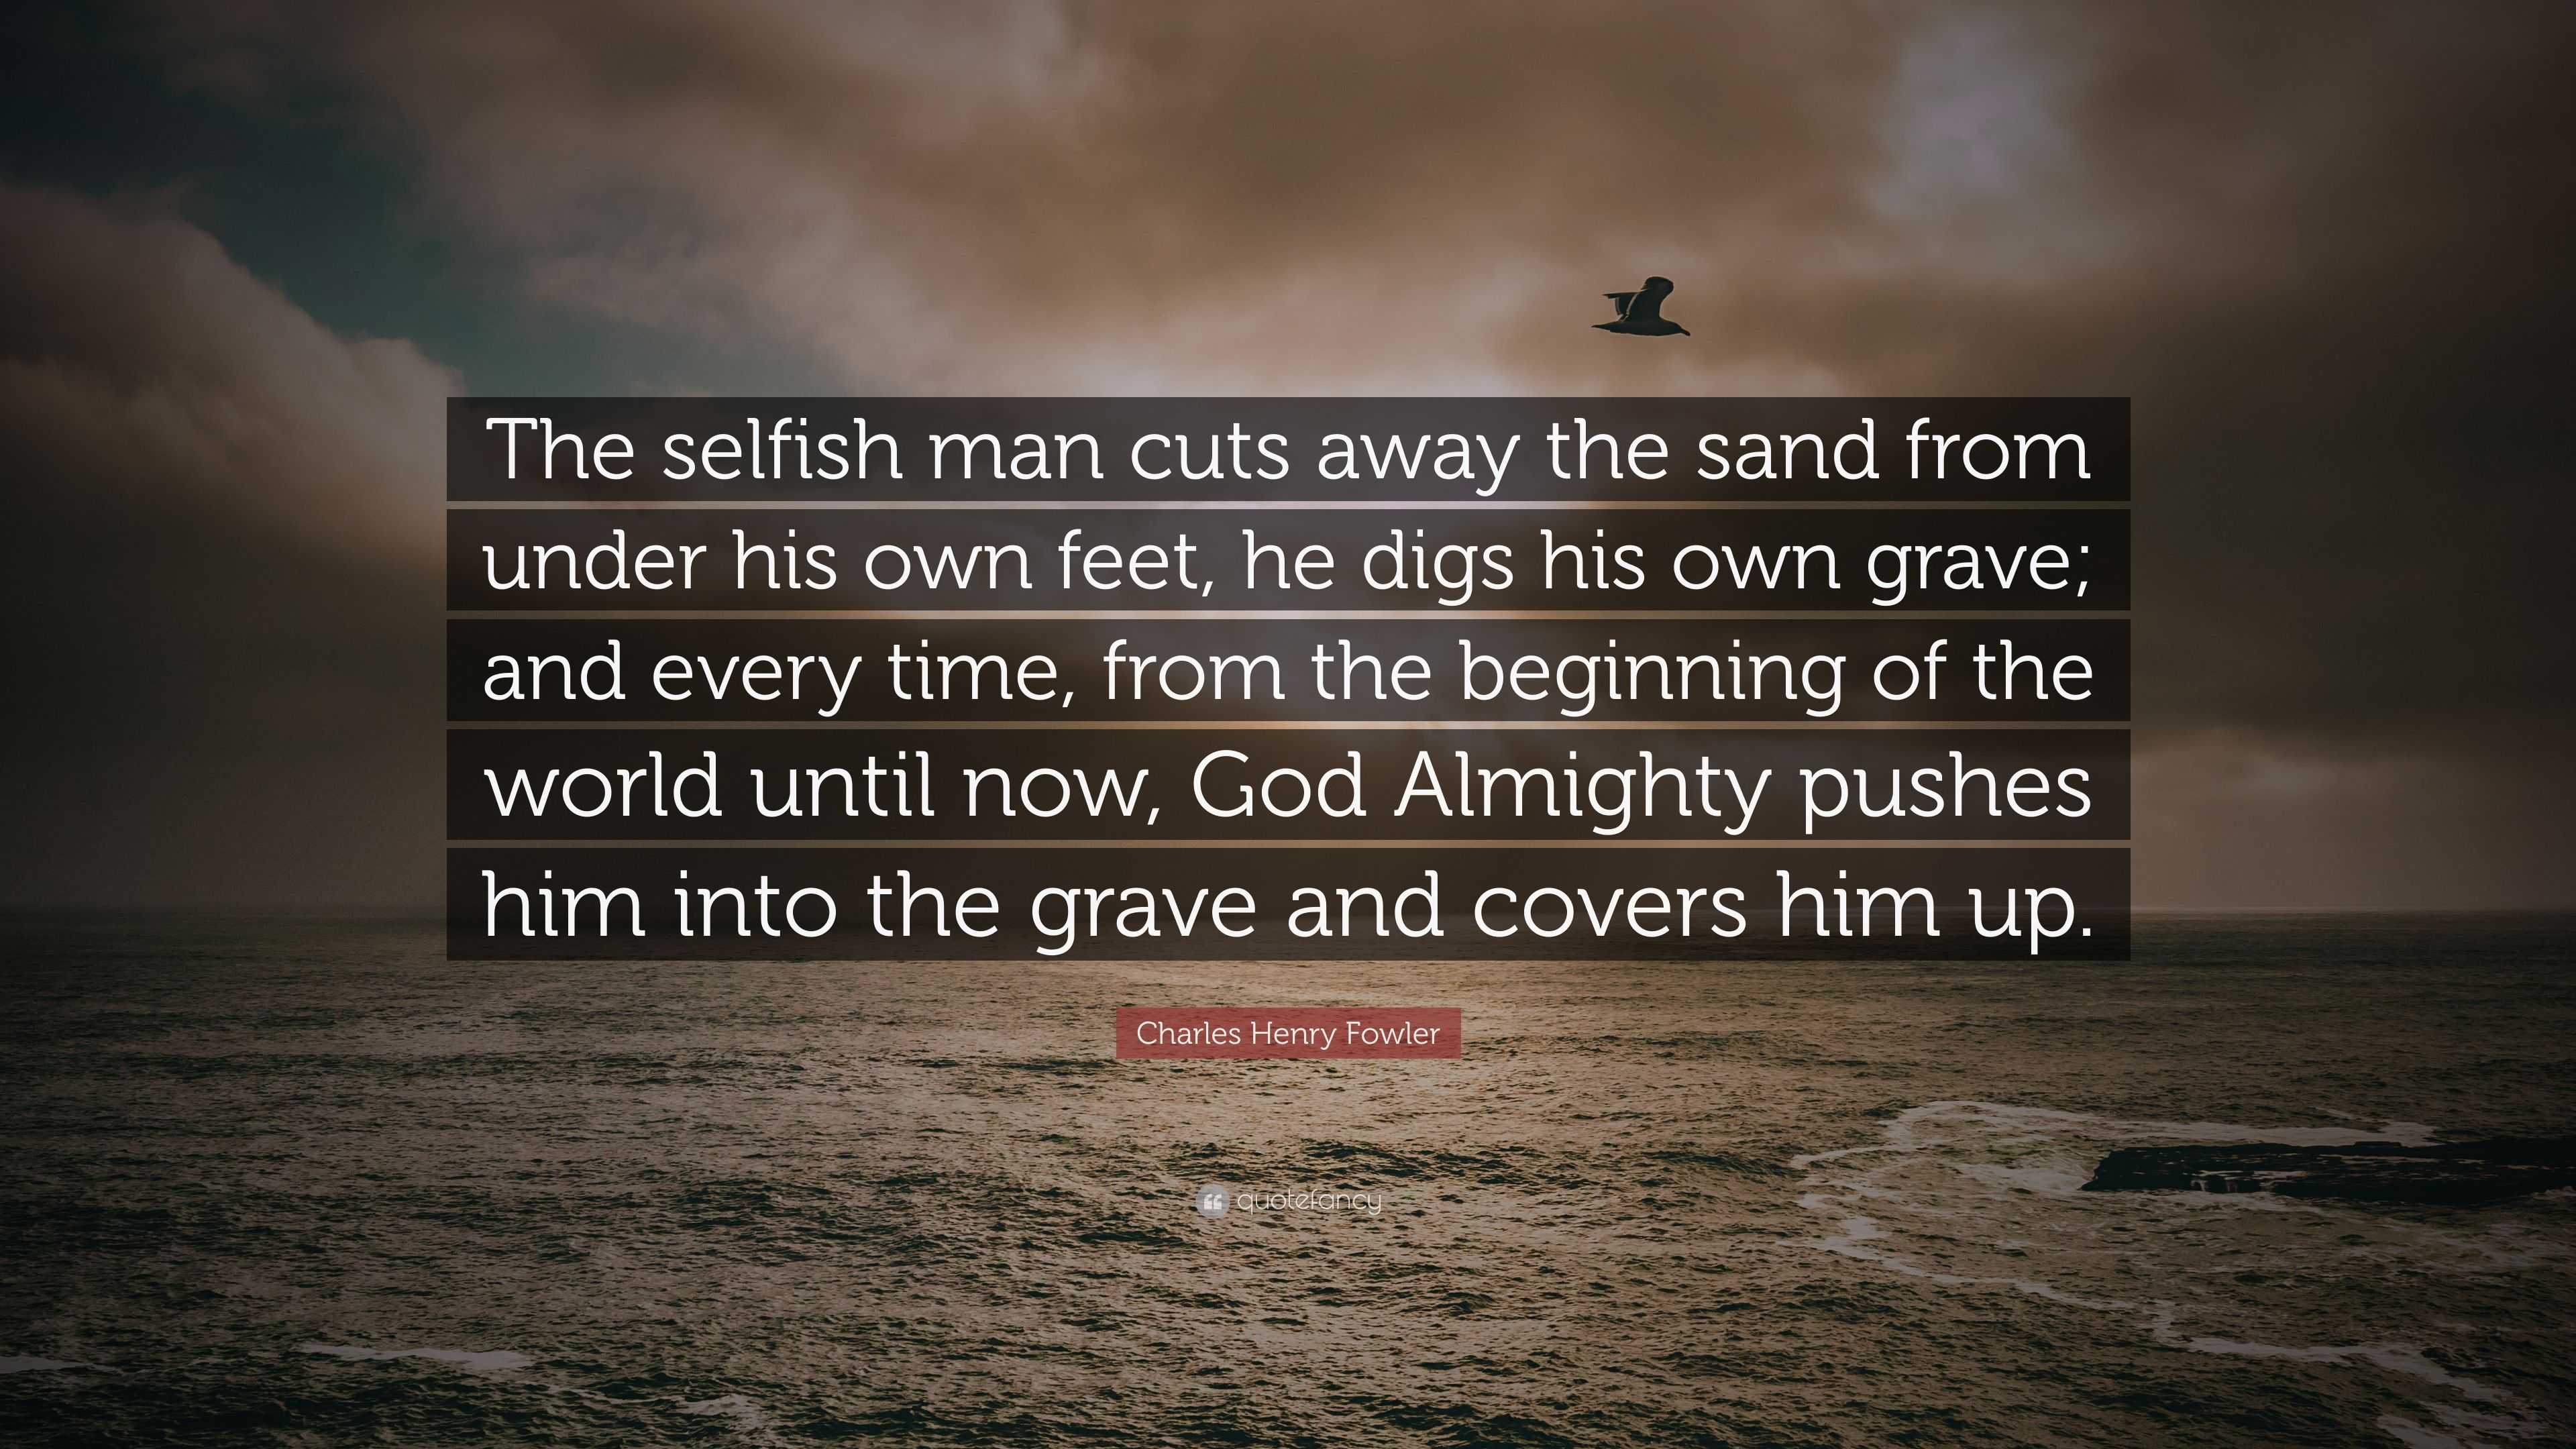 Charles Henry Fowler Quote: “The selfish man cuts away the sand from ...